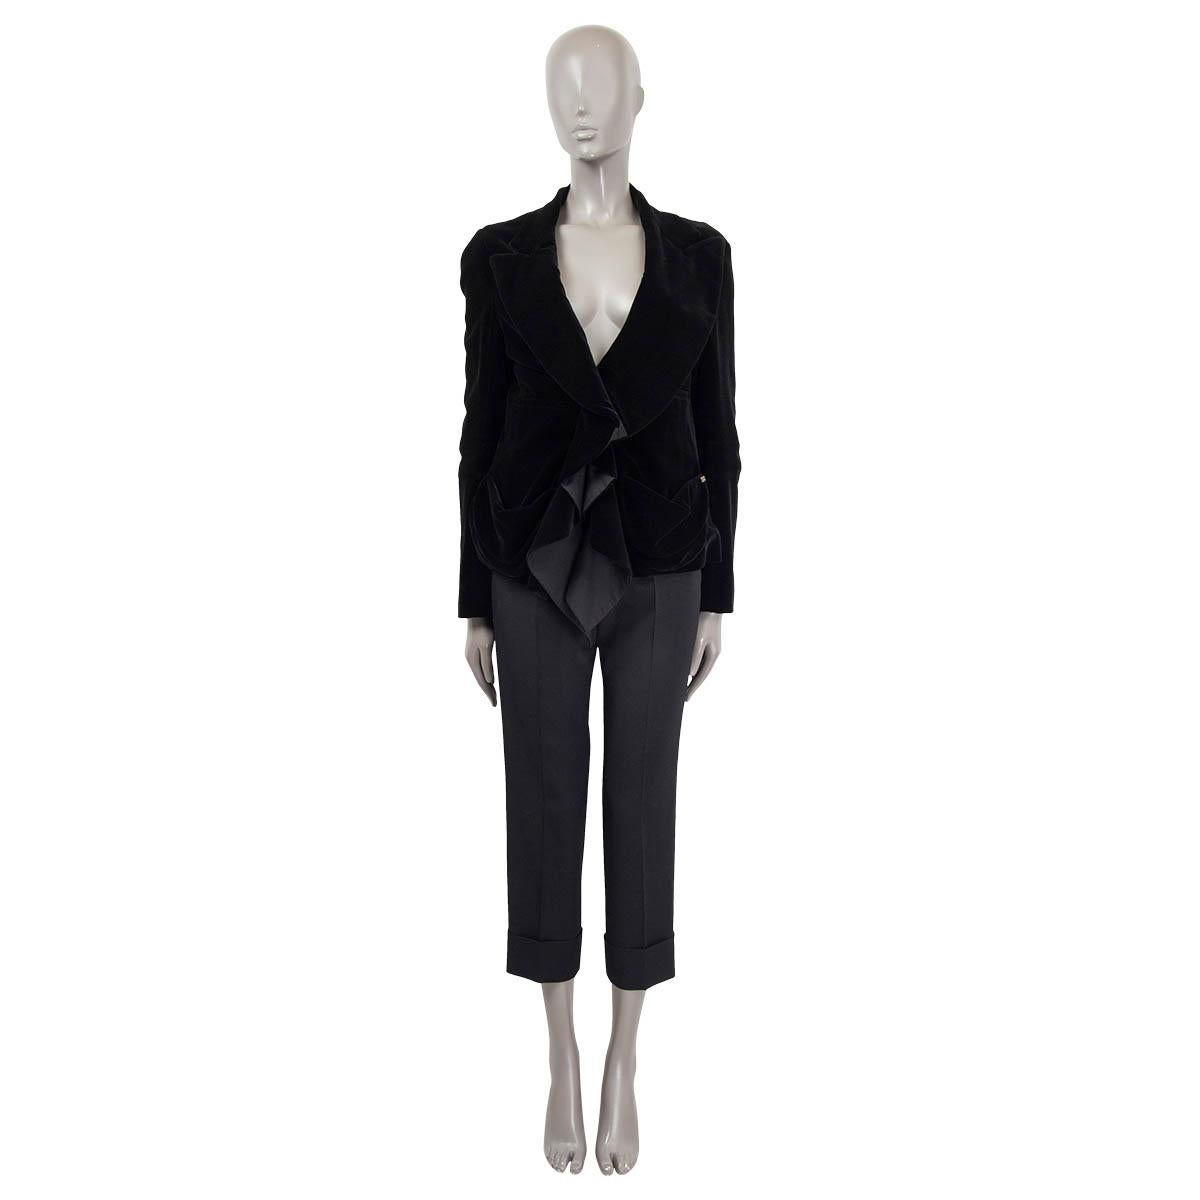 100% authentic Sonia Rykiel ruched blazer in black velvet (please note content tag missing). Features buttoned cuffs, two pockets on the front and a sewn shut chest pockets. Opens with with a ribbon on the front. Lined in black silk (100%). Has been